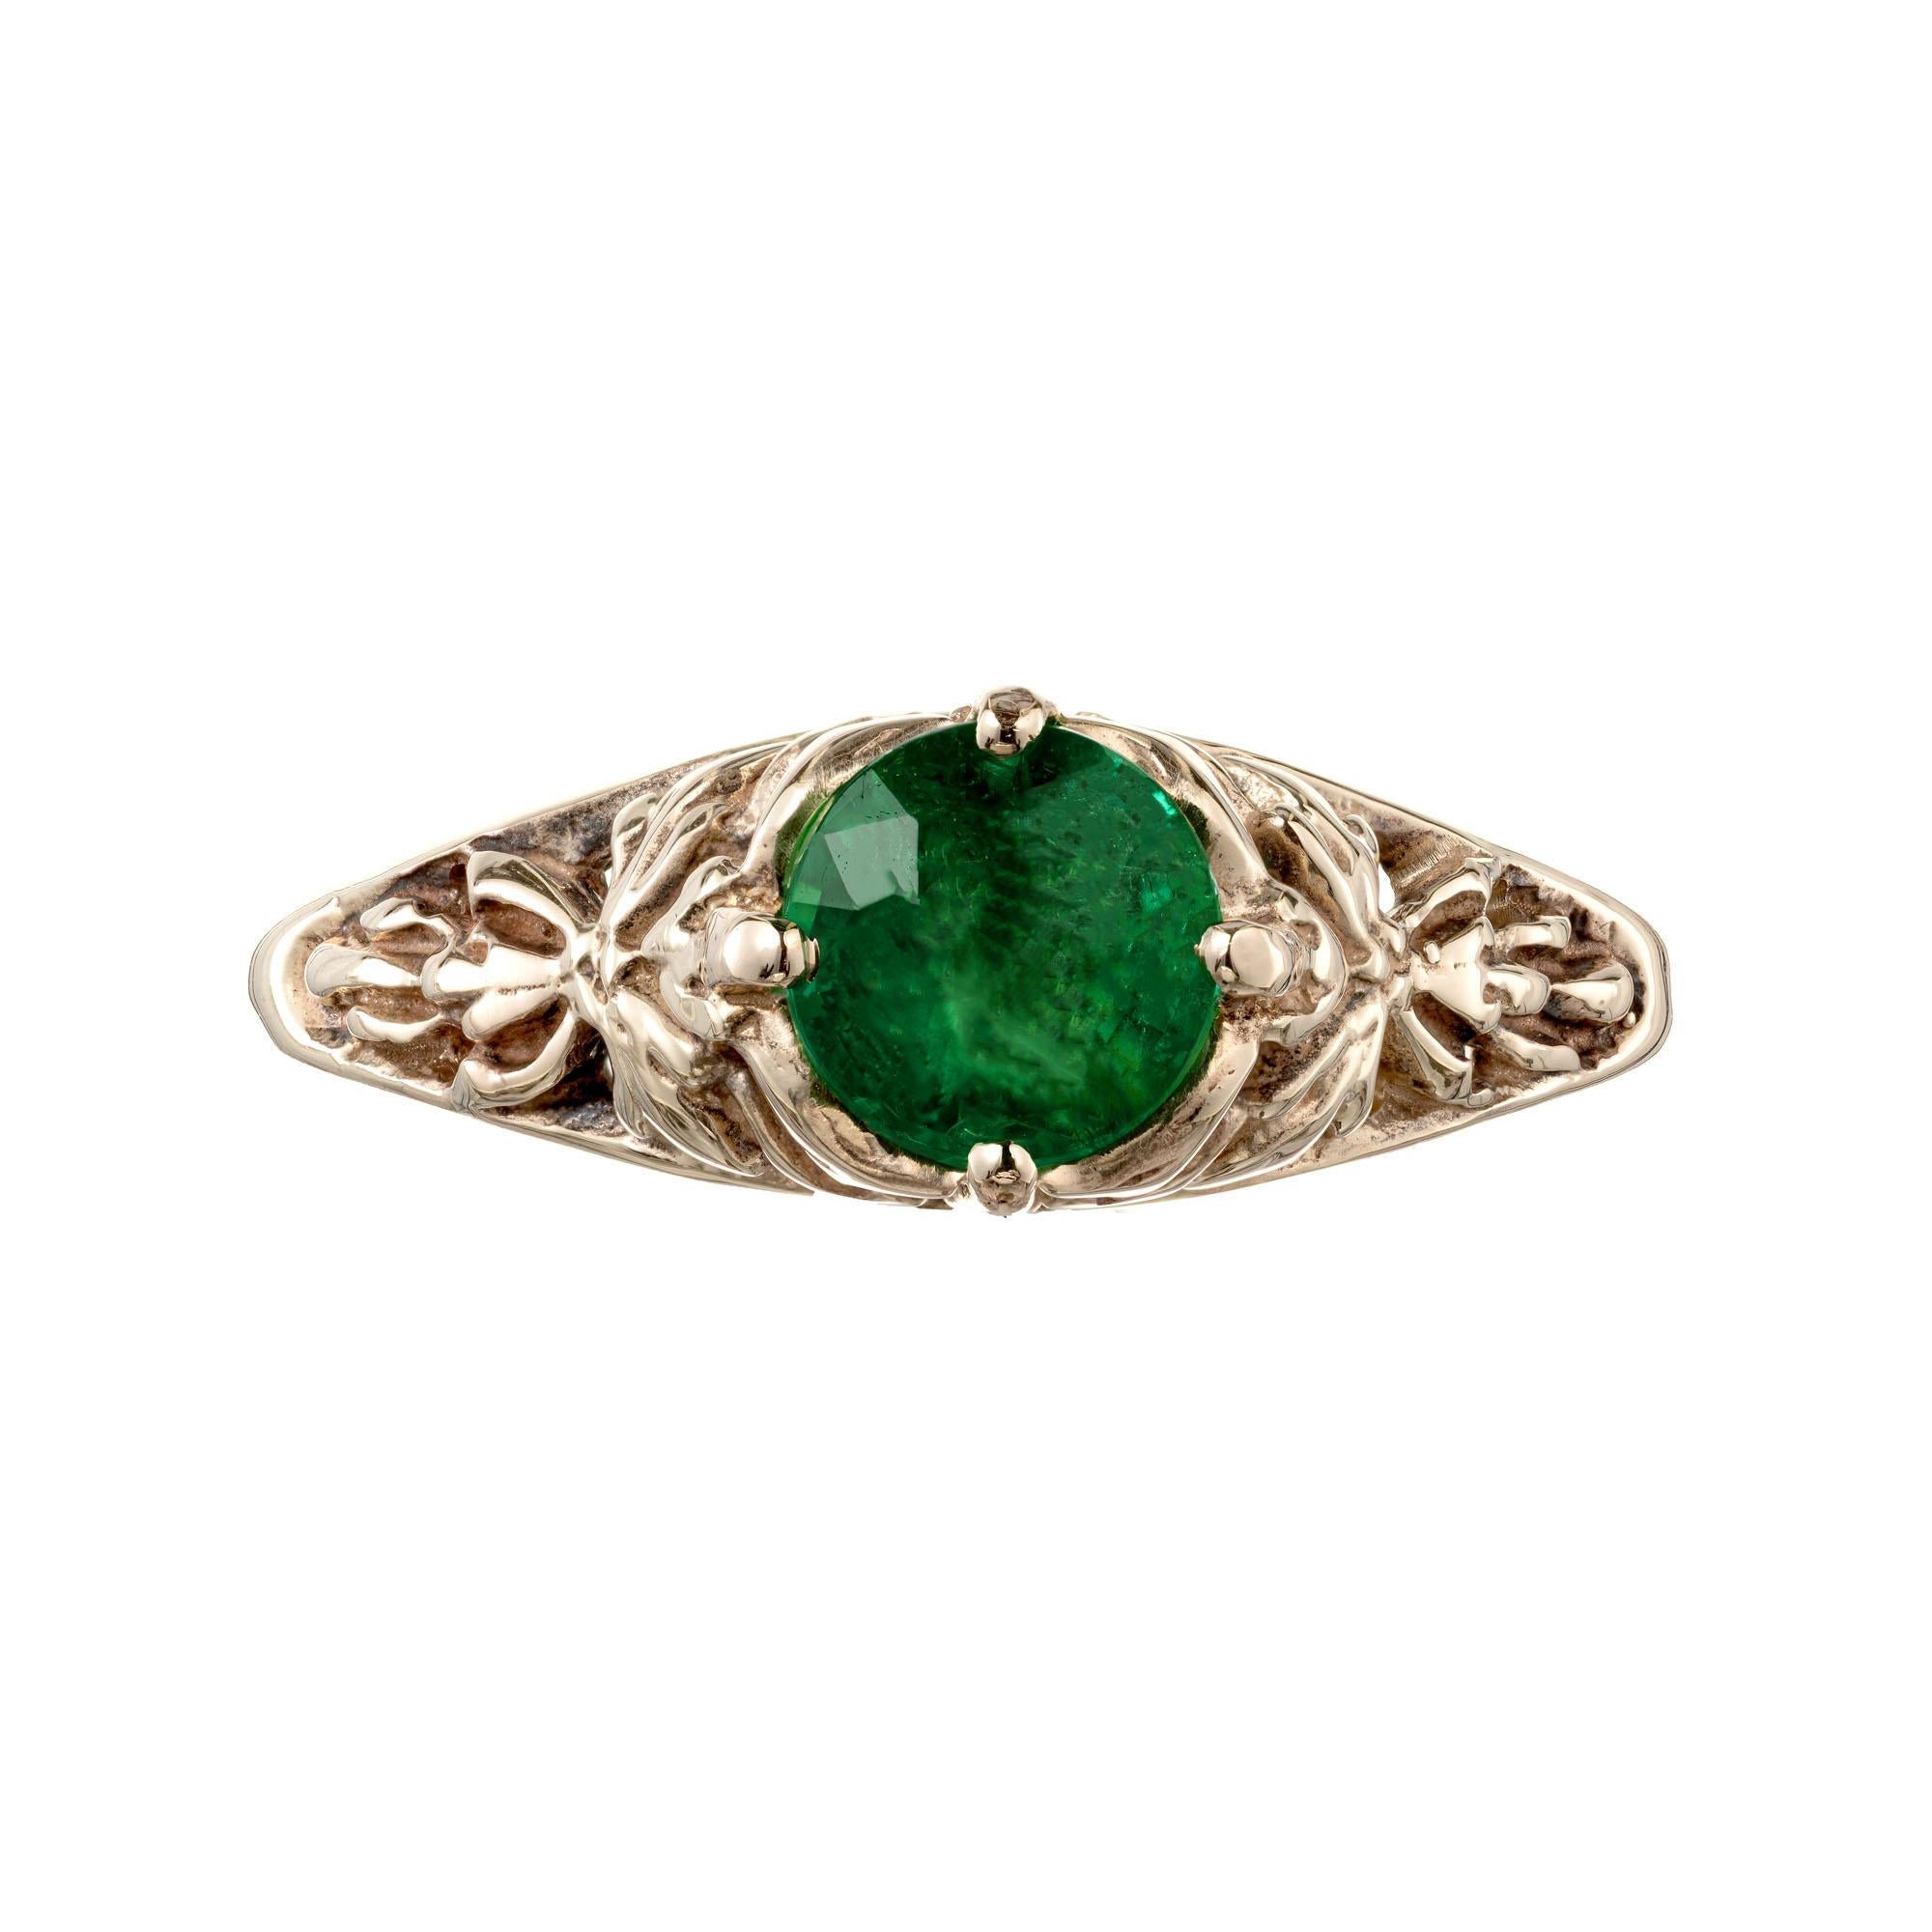 Bright green natural round emerald engagement ring. In a pierced open work 14k yellow gold engagement setting. 

1 round bright green emerald, approx. .57cts GIA Certificate # 6203194646
Size 6.75 and sizable
14k yellow gold 
Stamped: 14k
2.1 grams